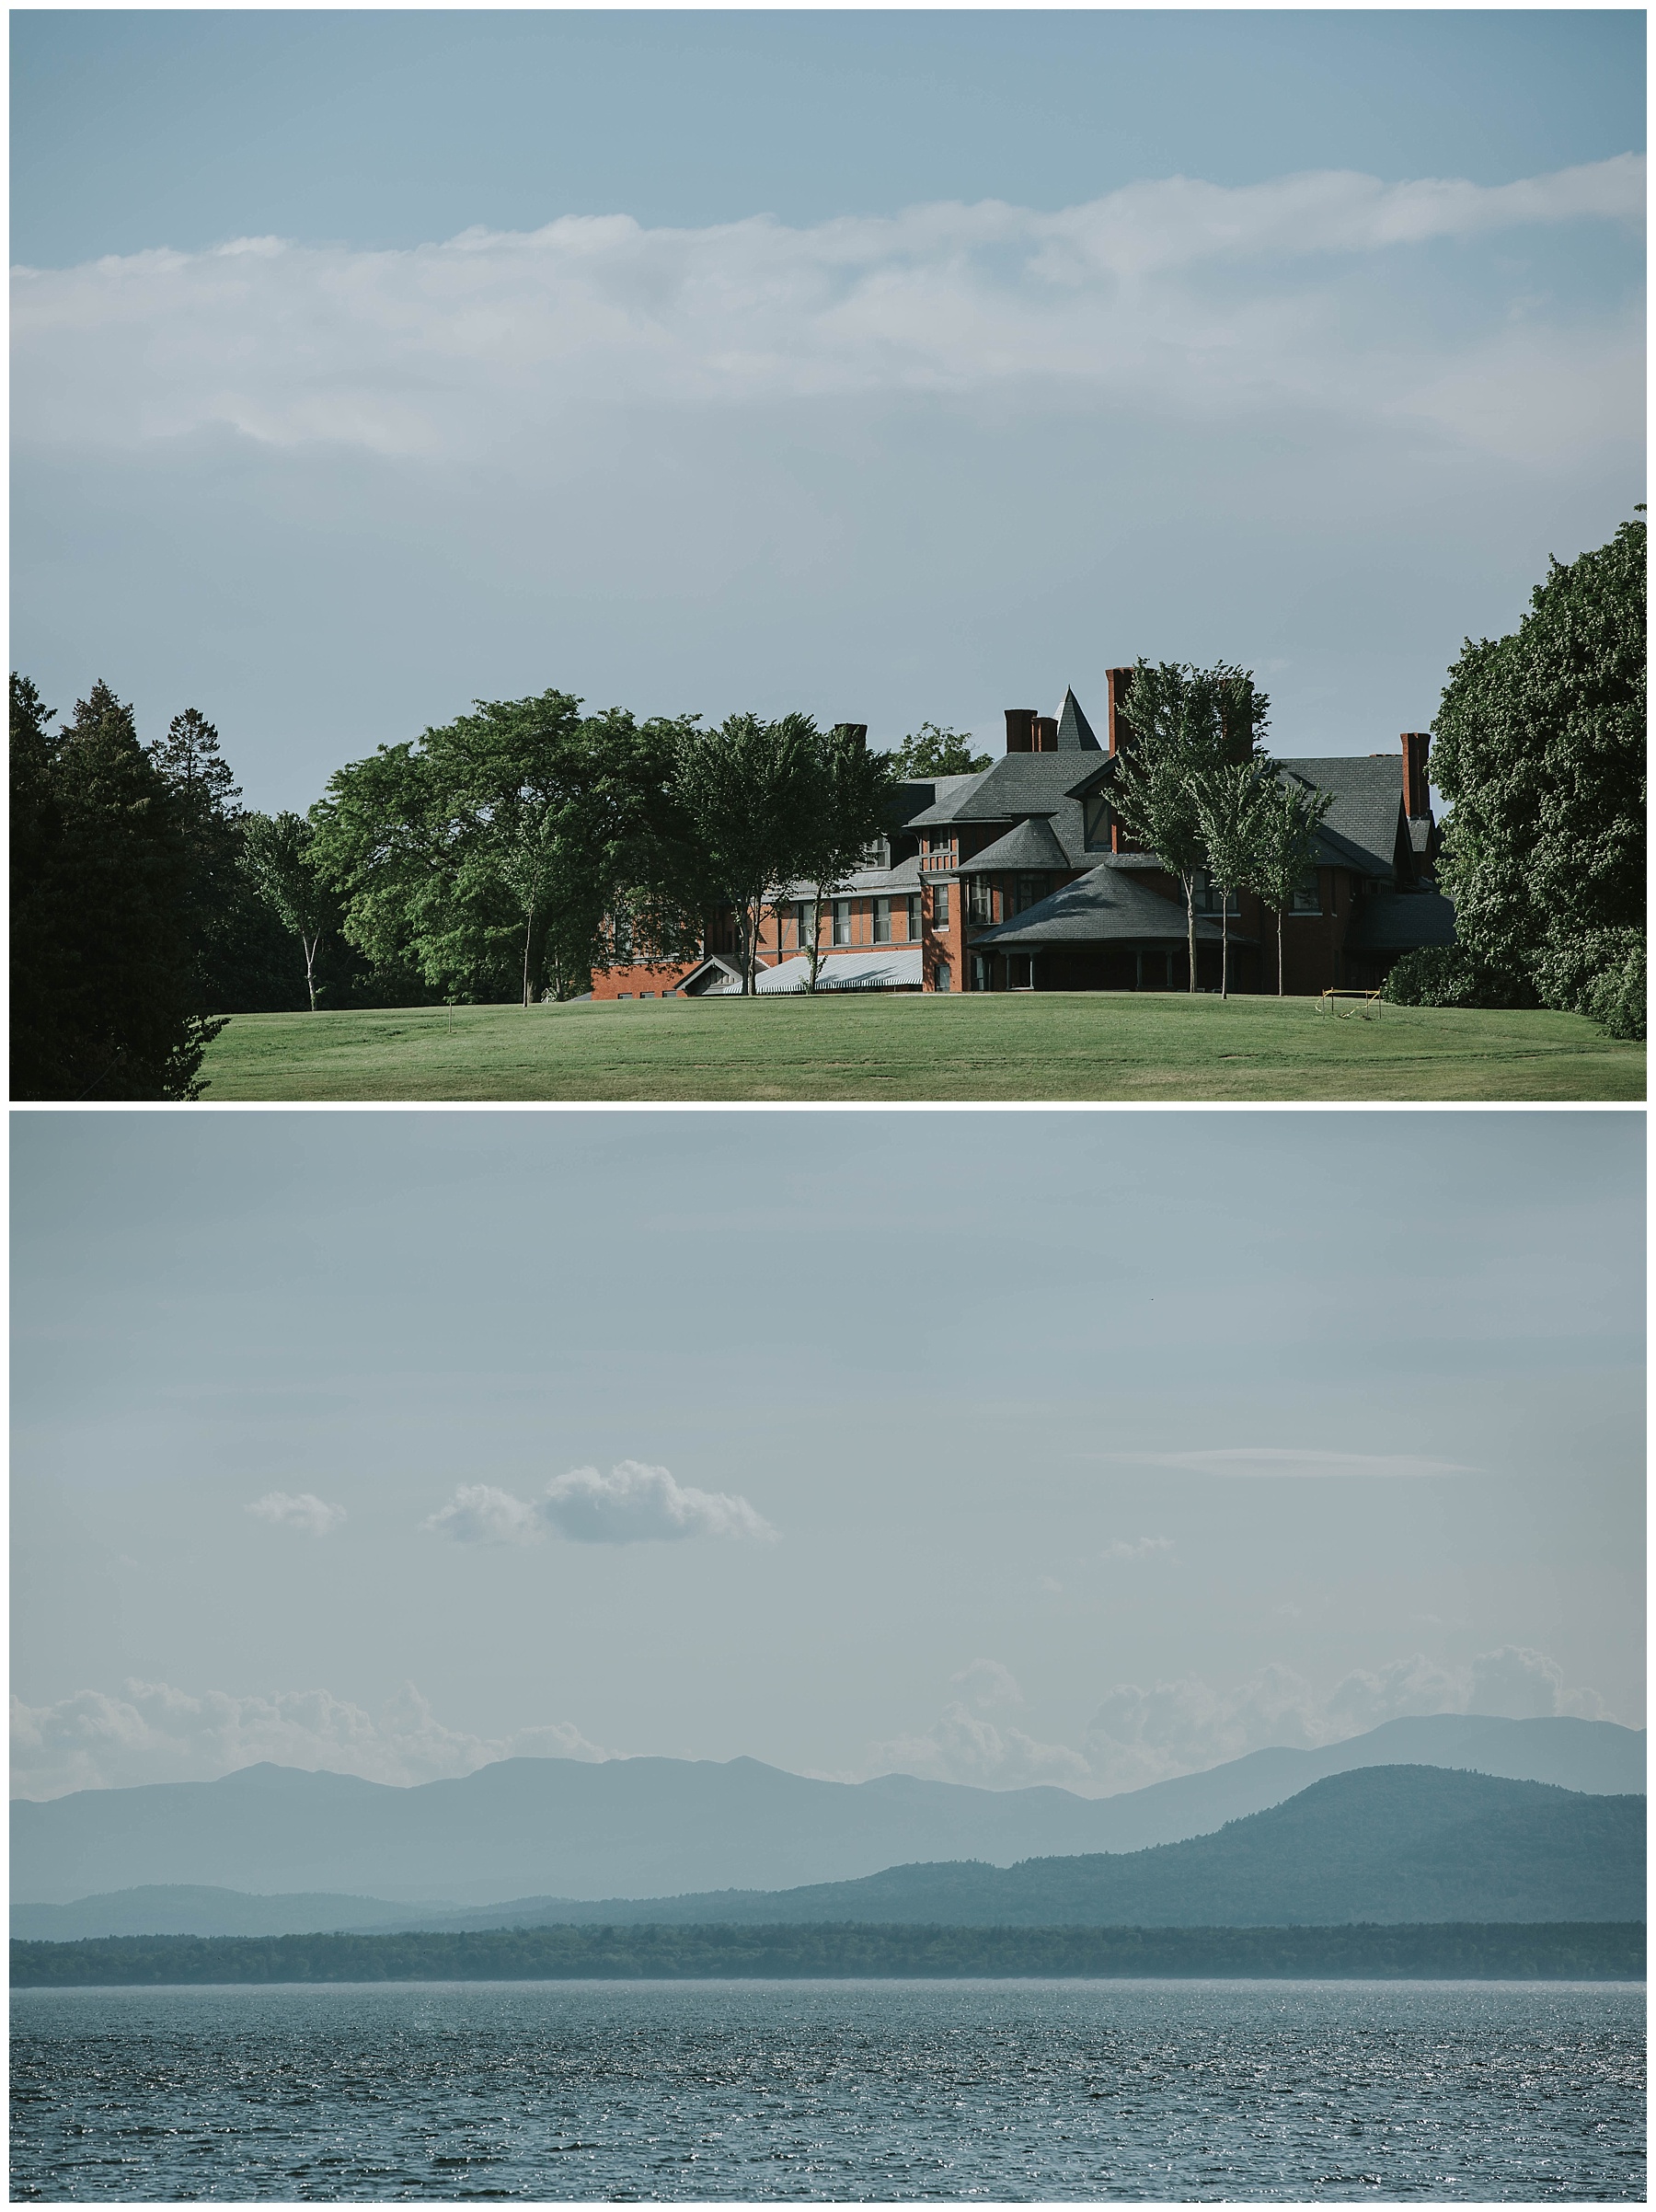 Shelburne Farms Inn and Lake Champlaine with Adirondack mountains in the background | Amy Donohue Photography